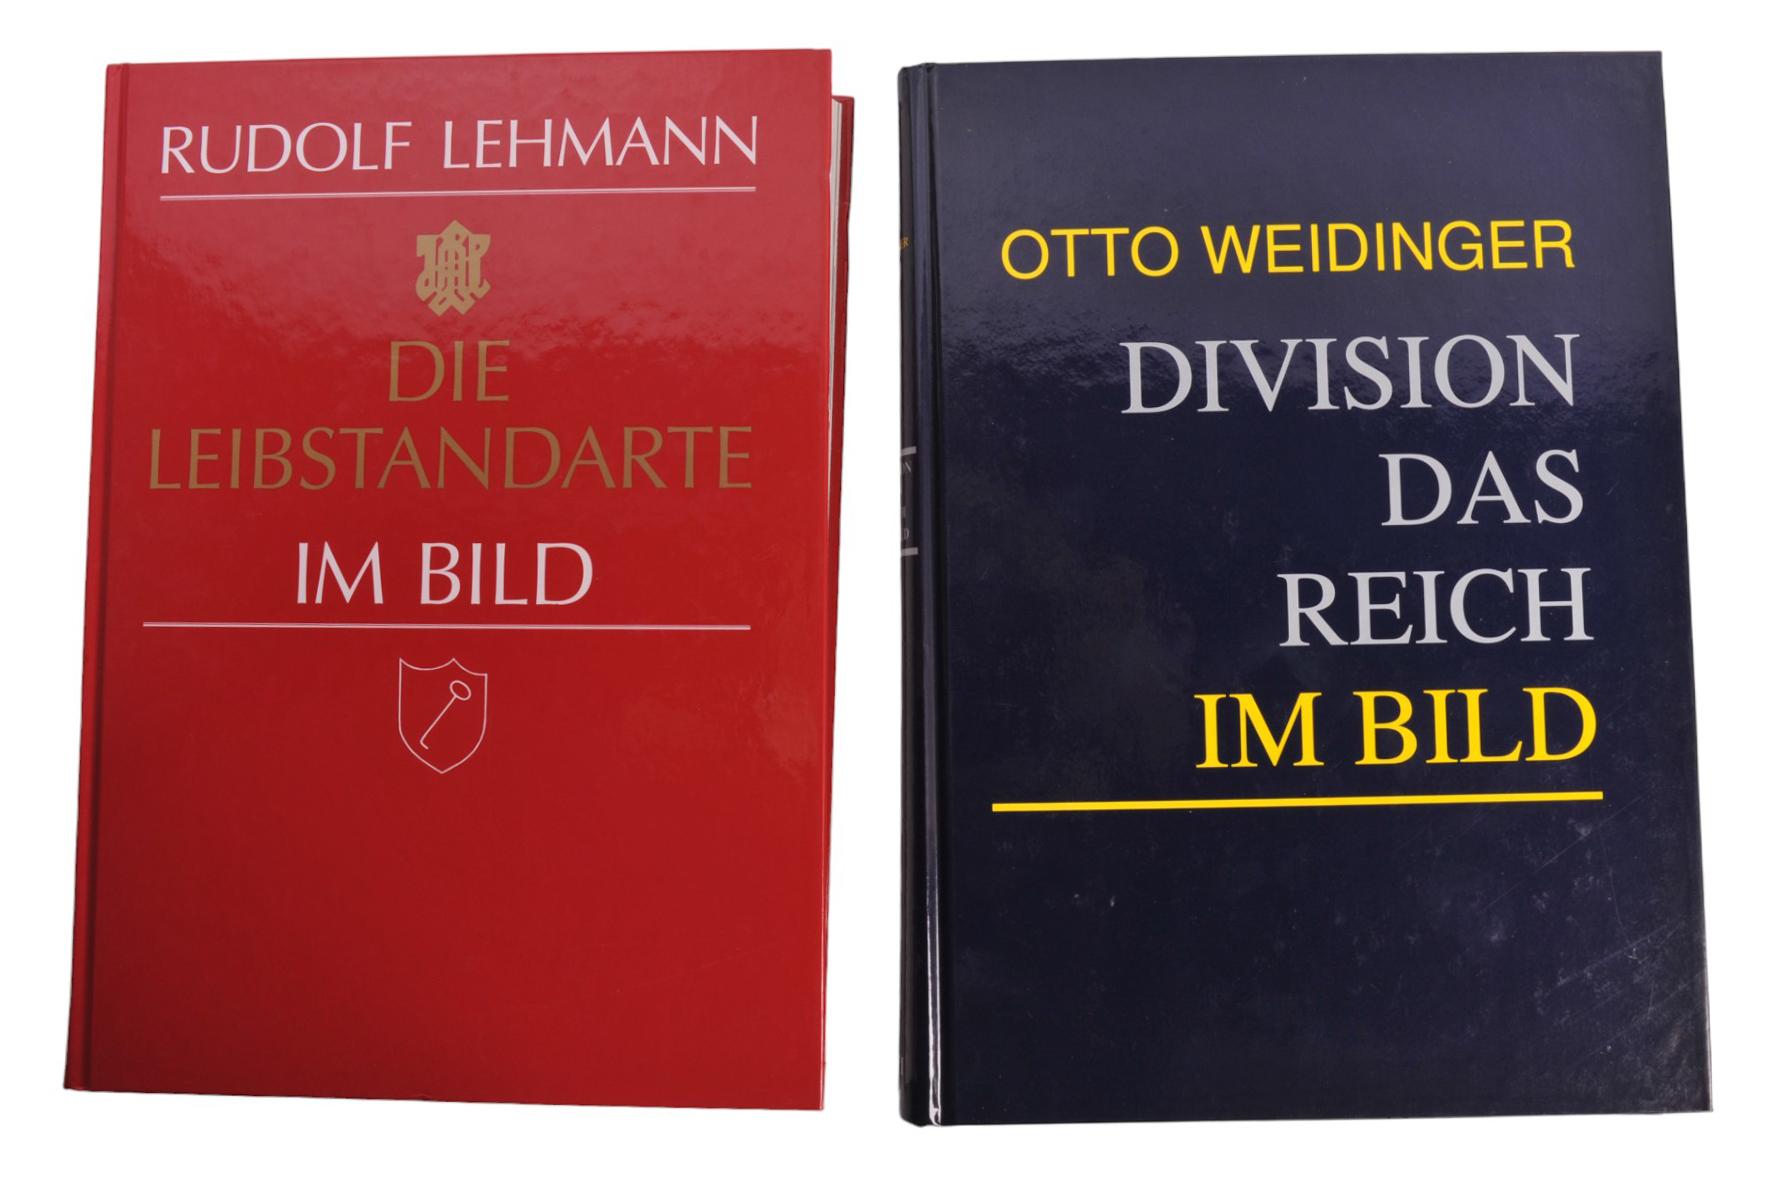 Two Collector Reference Books on German Military Units in German (ARD)